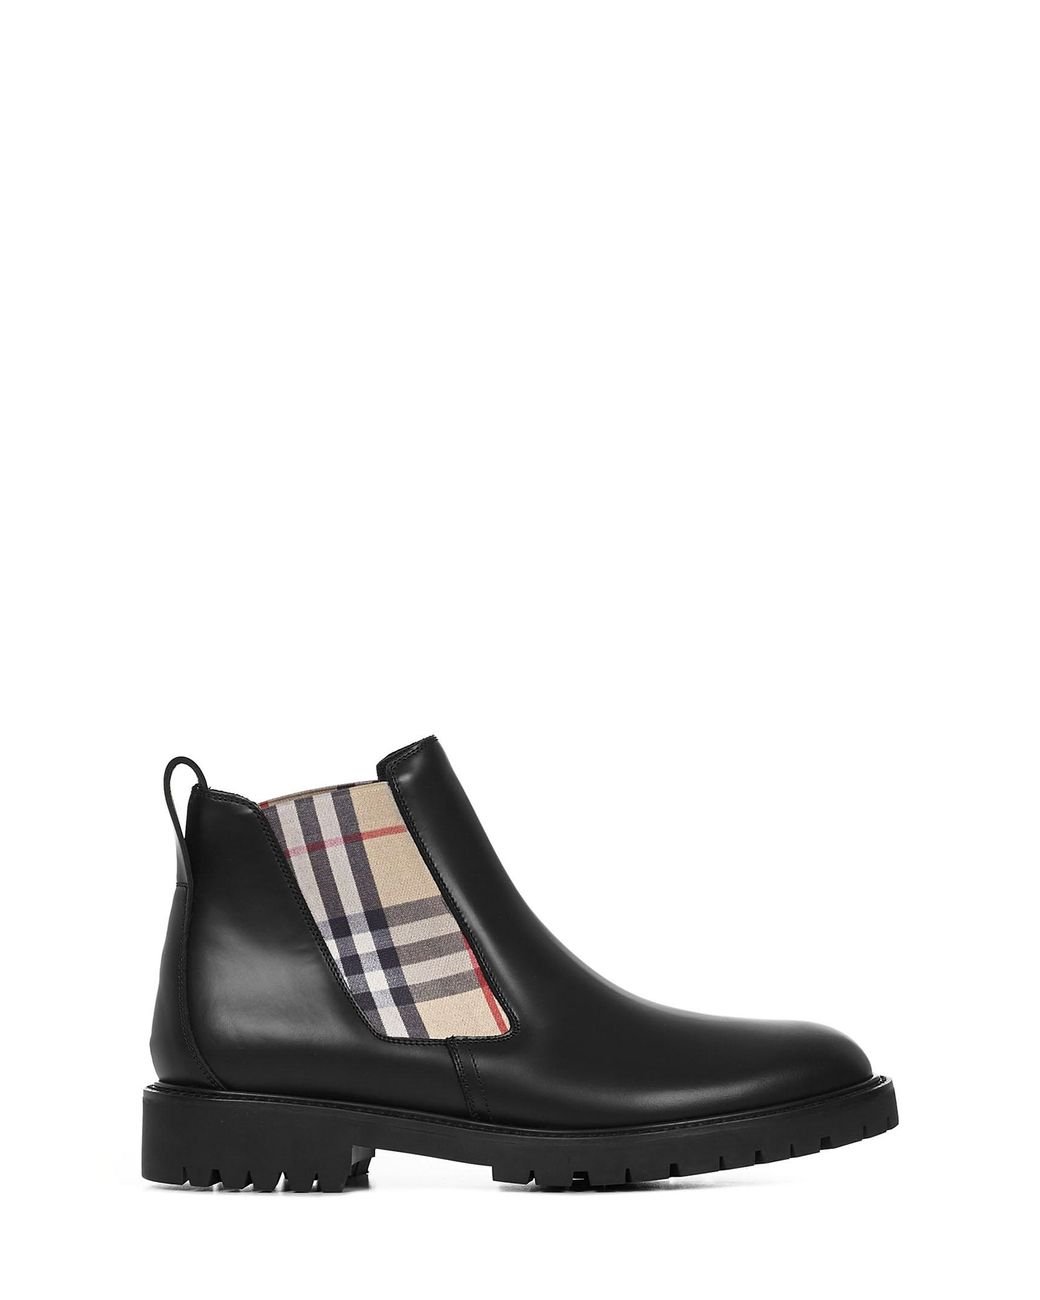 Burberry Leather Boots in Black for Men - Lyst